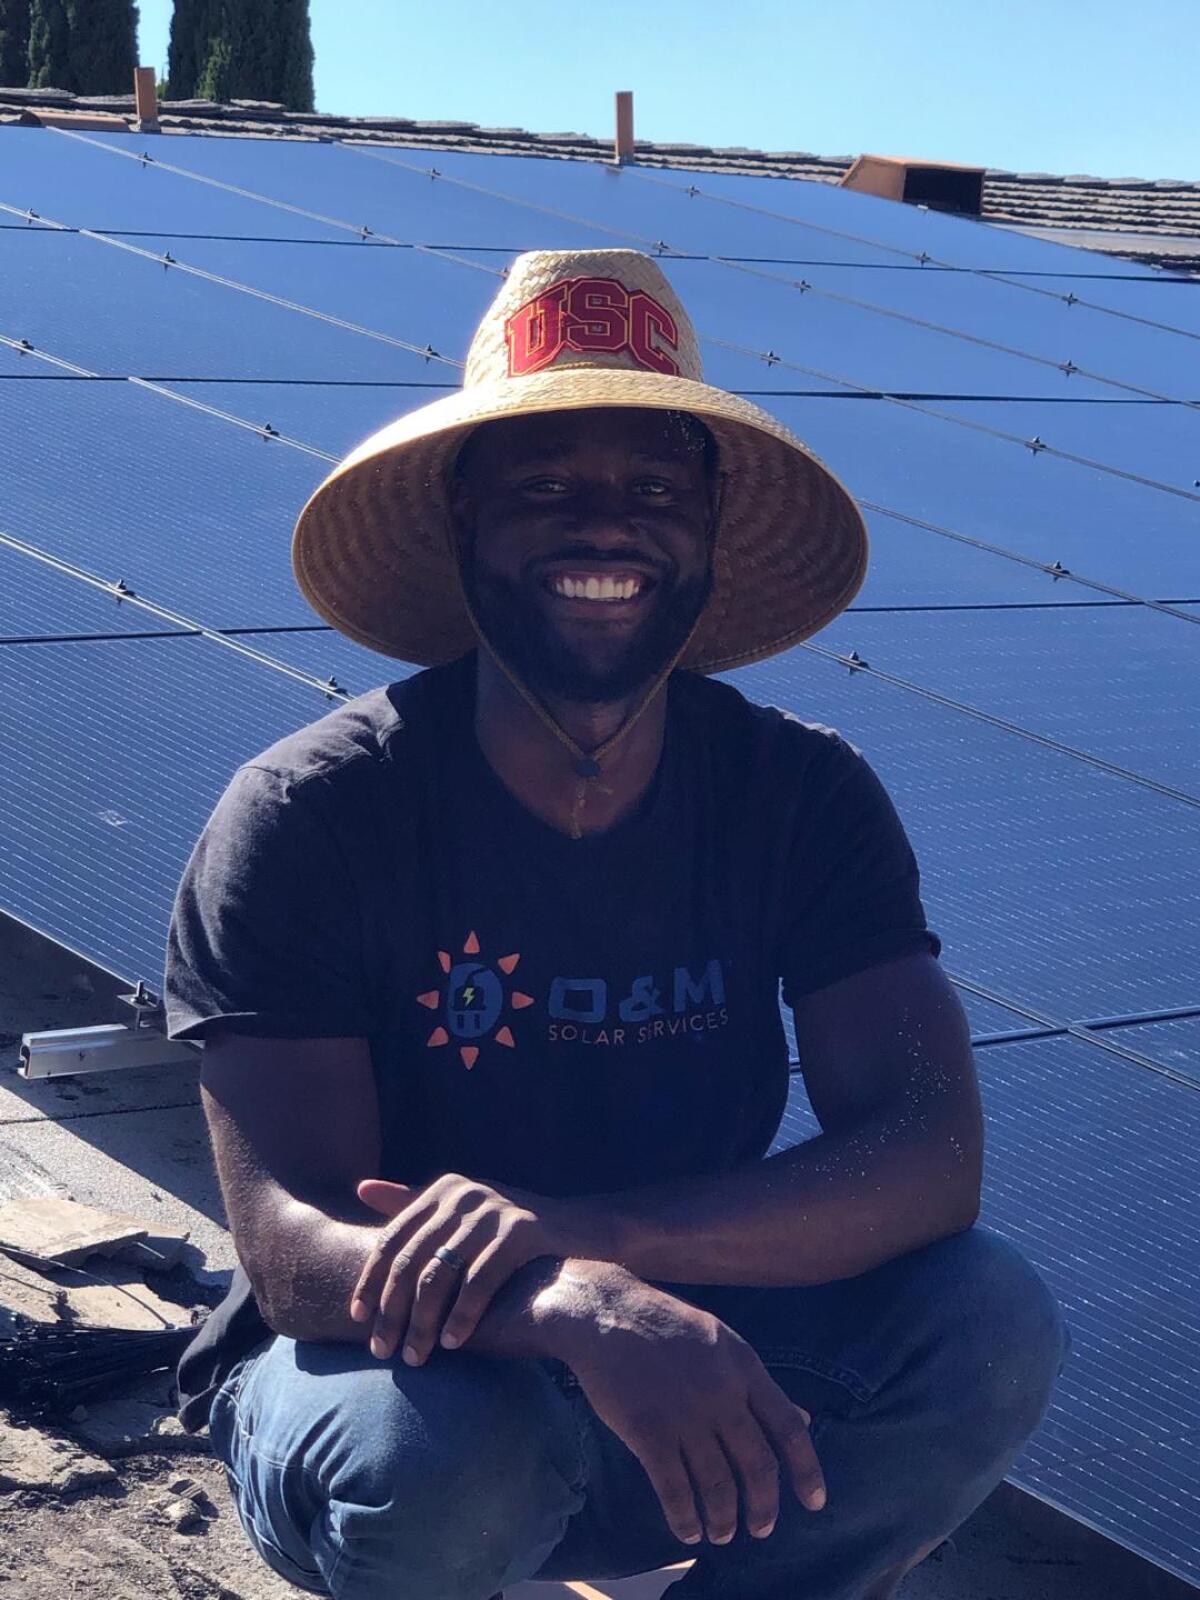 Kenneth Wells, who served six years in jail for carjacking, received training in solar installation from GRID Alternatives, a nonprofit that trains low-income individuals in solar. He started a solar business after quickly working his way up through the industry with the help of GRID.